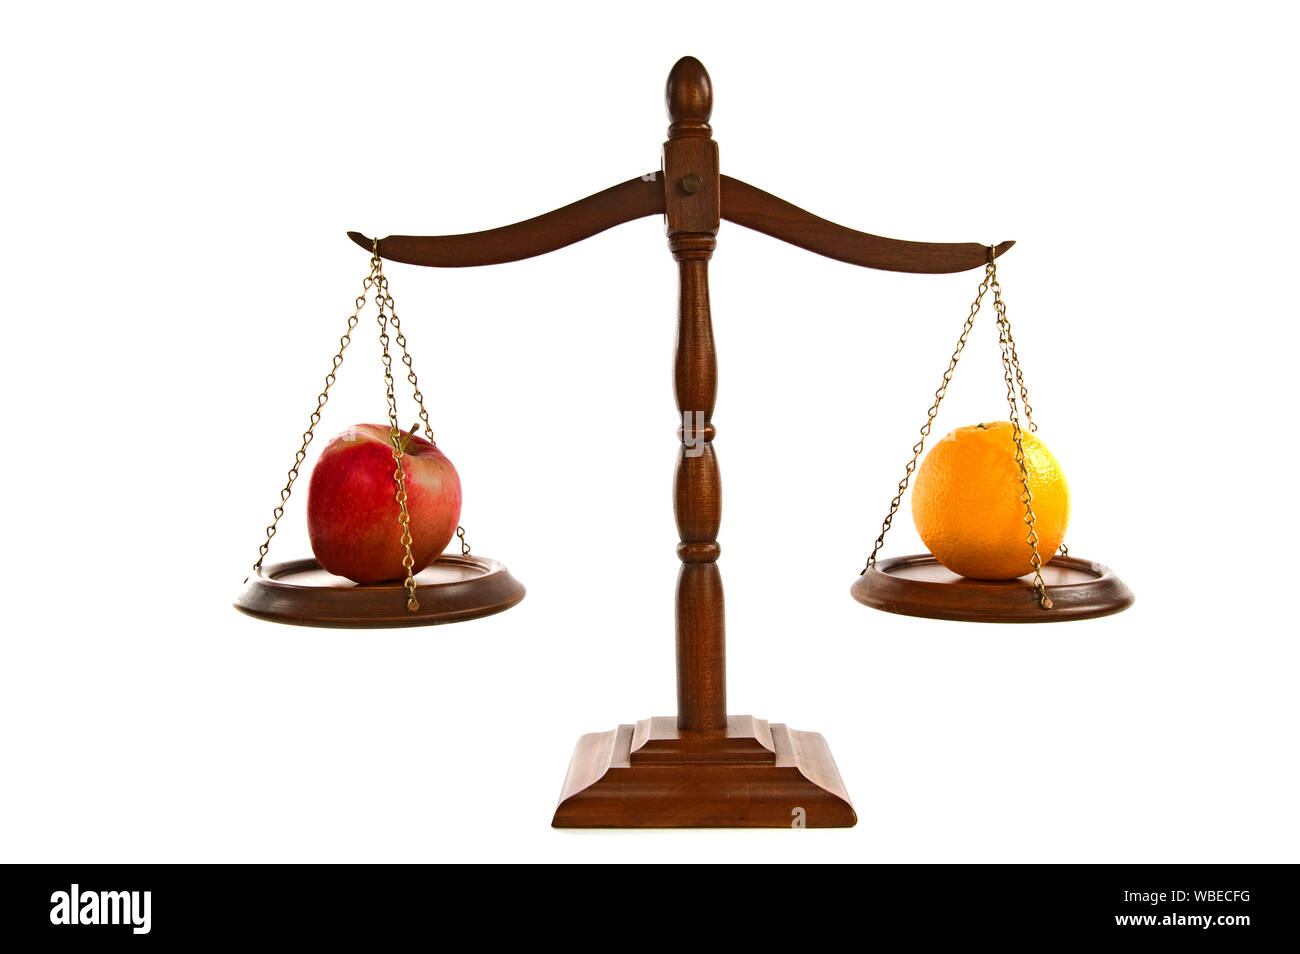 Horizontal shot of wooden scales of justice in balance.  There is an apple on one side and an orange on the other.  White background. Stock Photo